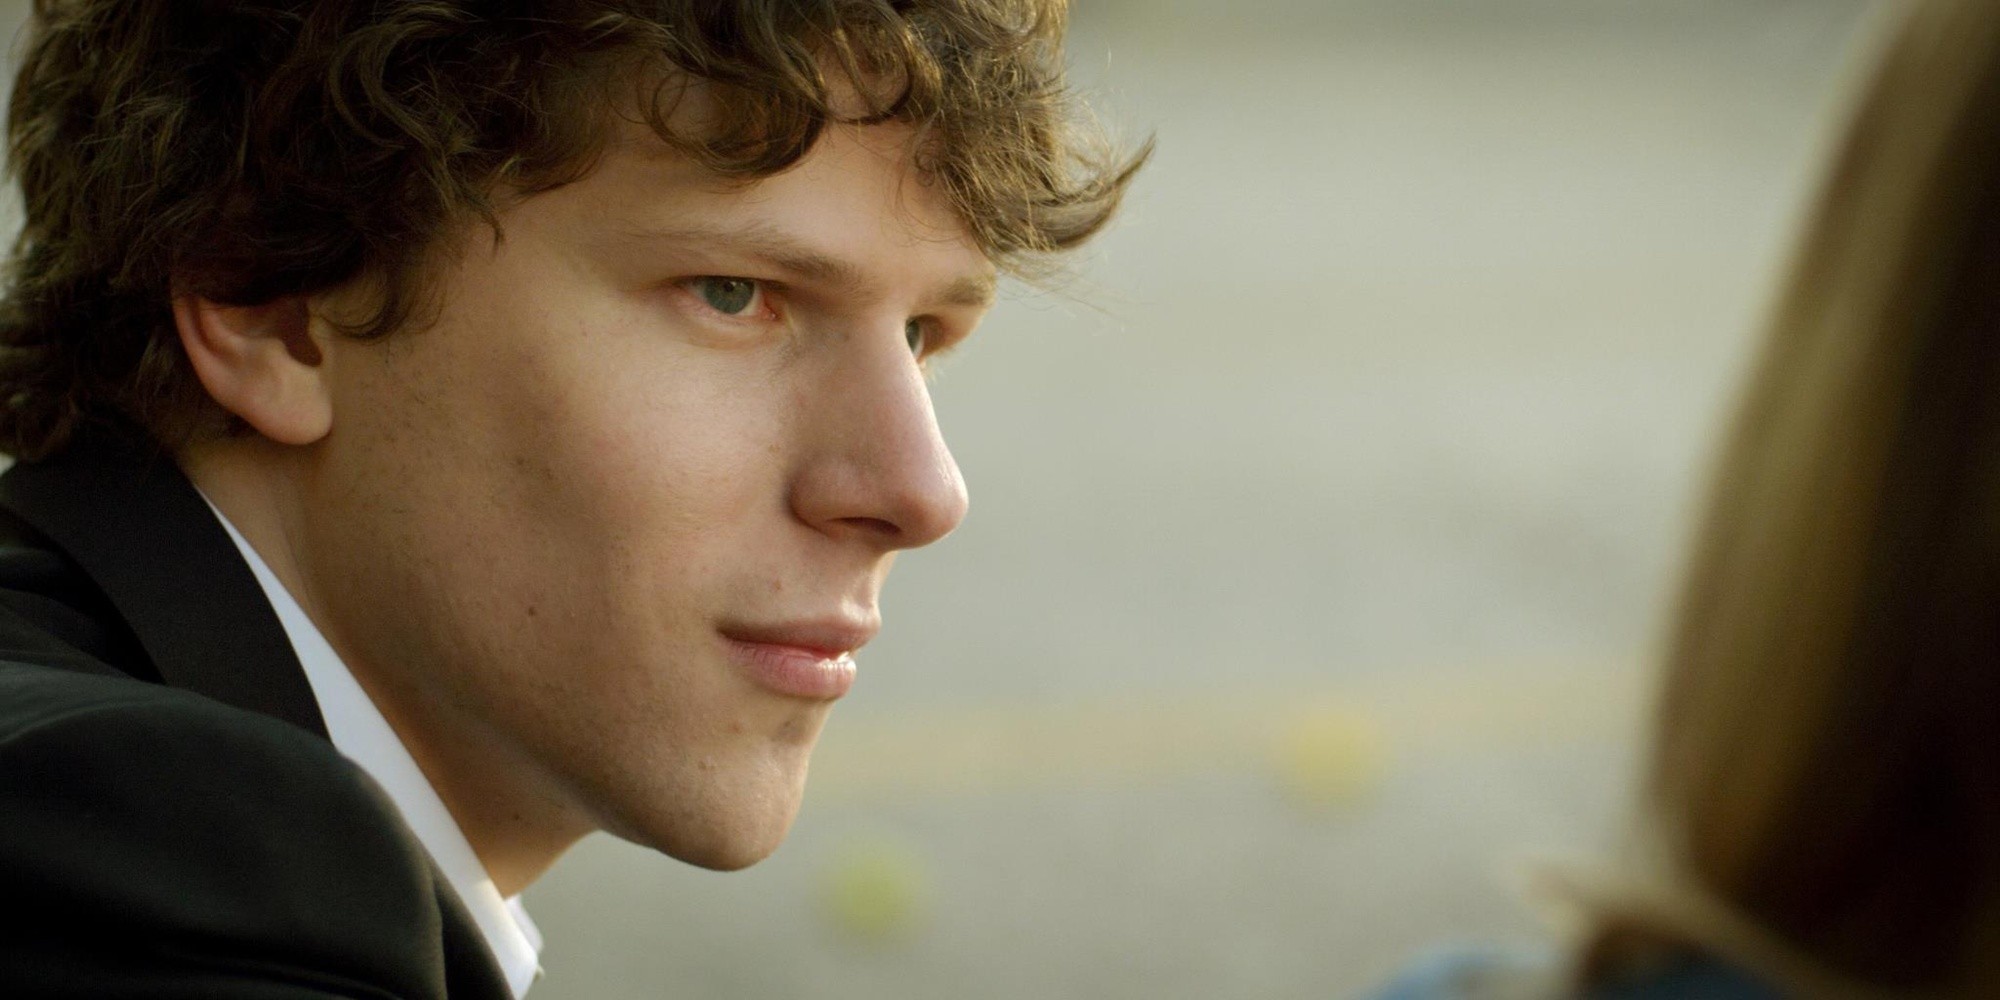 Jesse Eisenberg | Speaking Fee, Booking Agent, & Contact Info | CAA Speakers